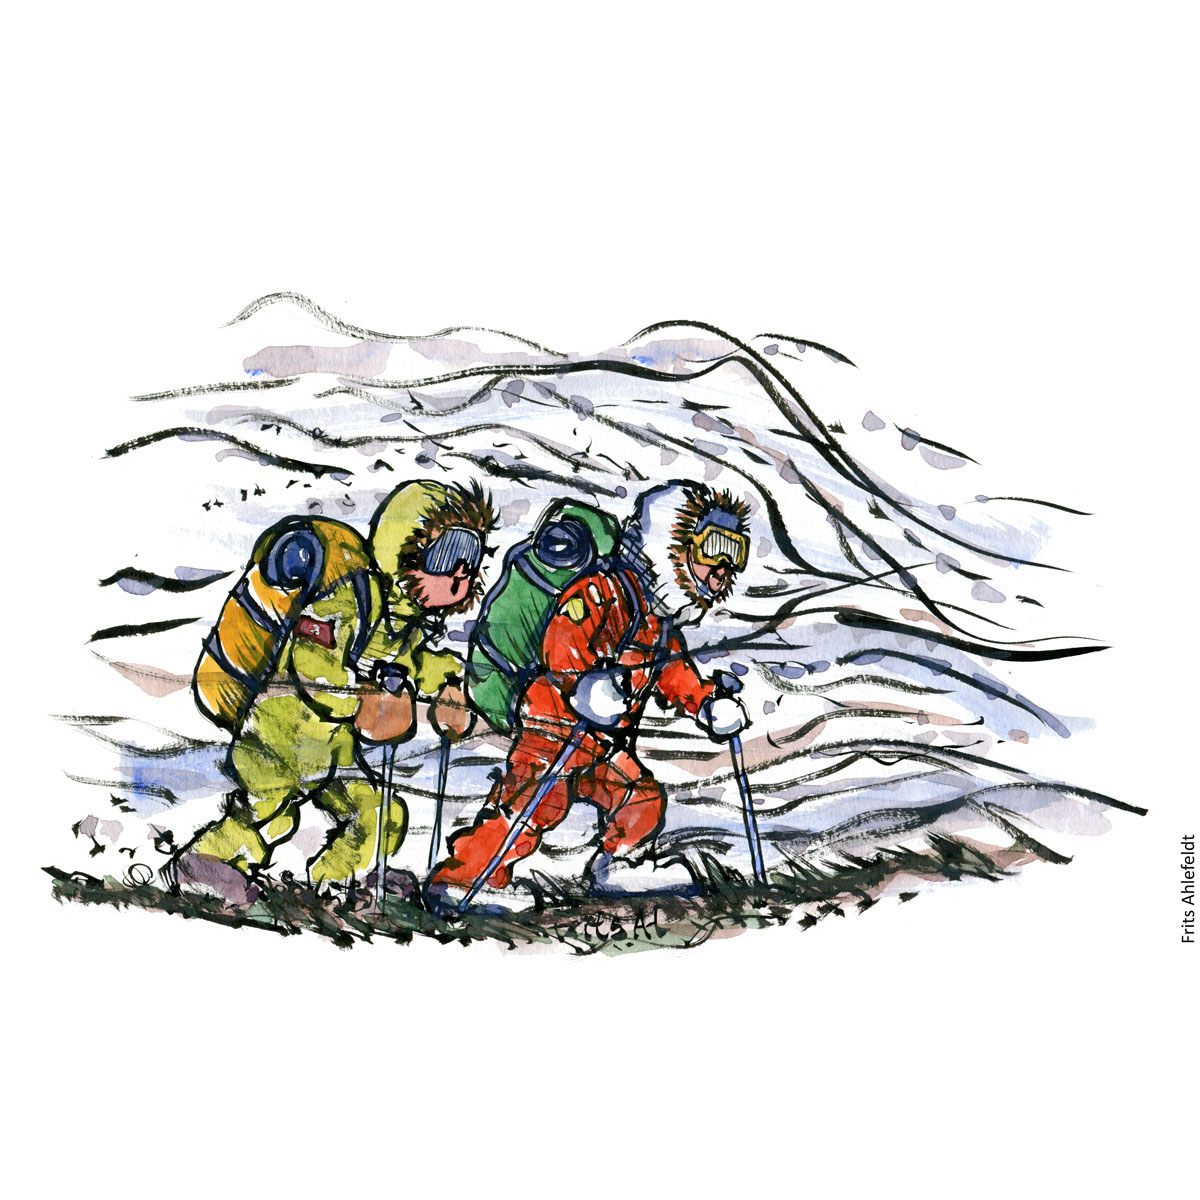 Drawing of two expedition hikers in storm. Handmade color illustration by Frits Ahlefeldt